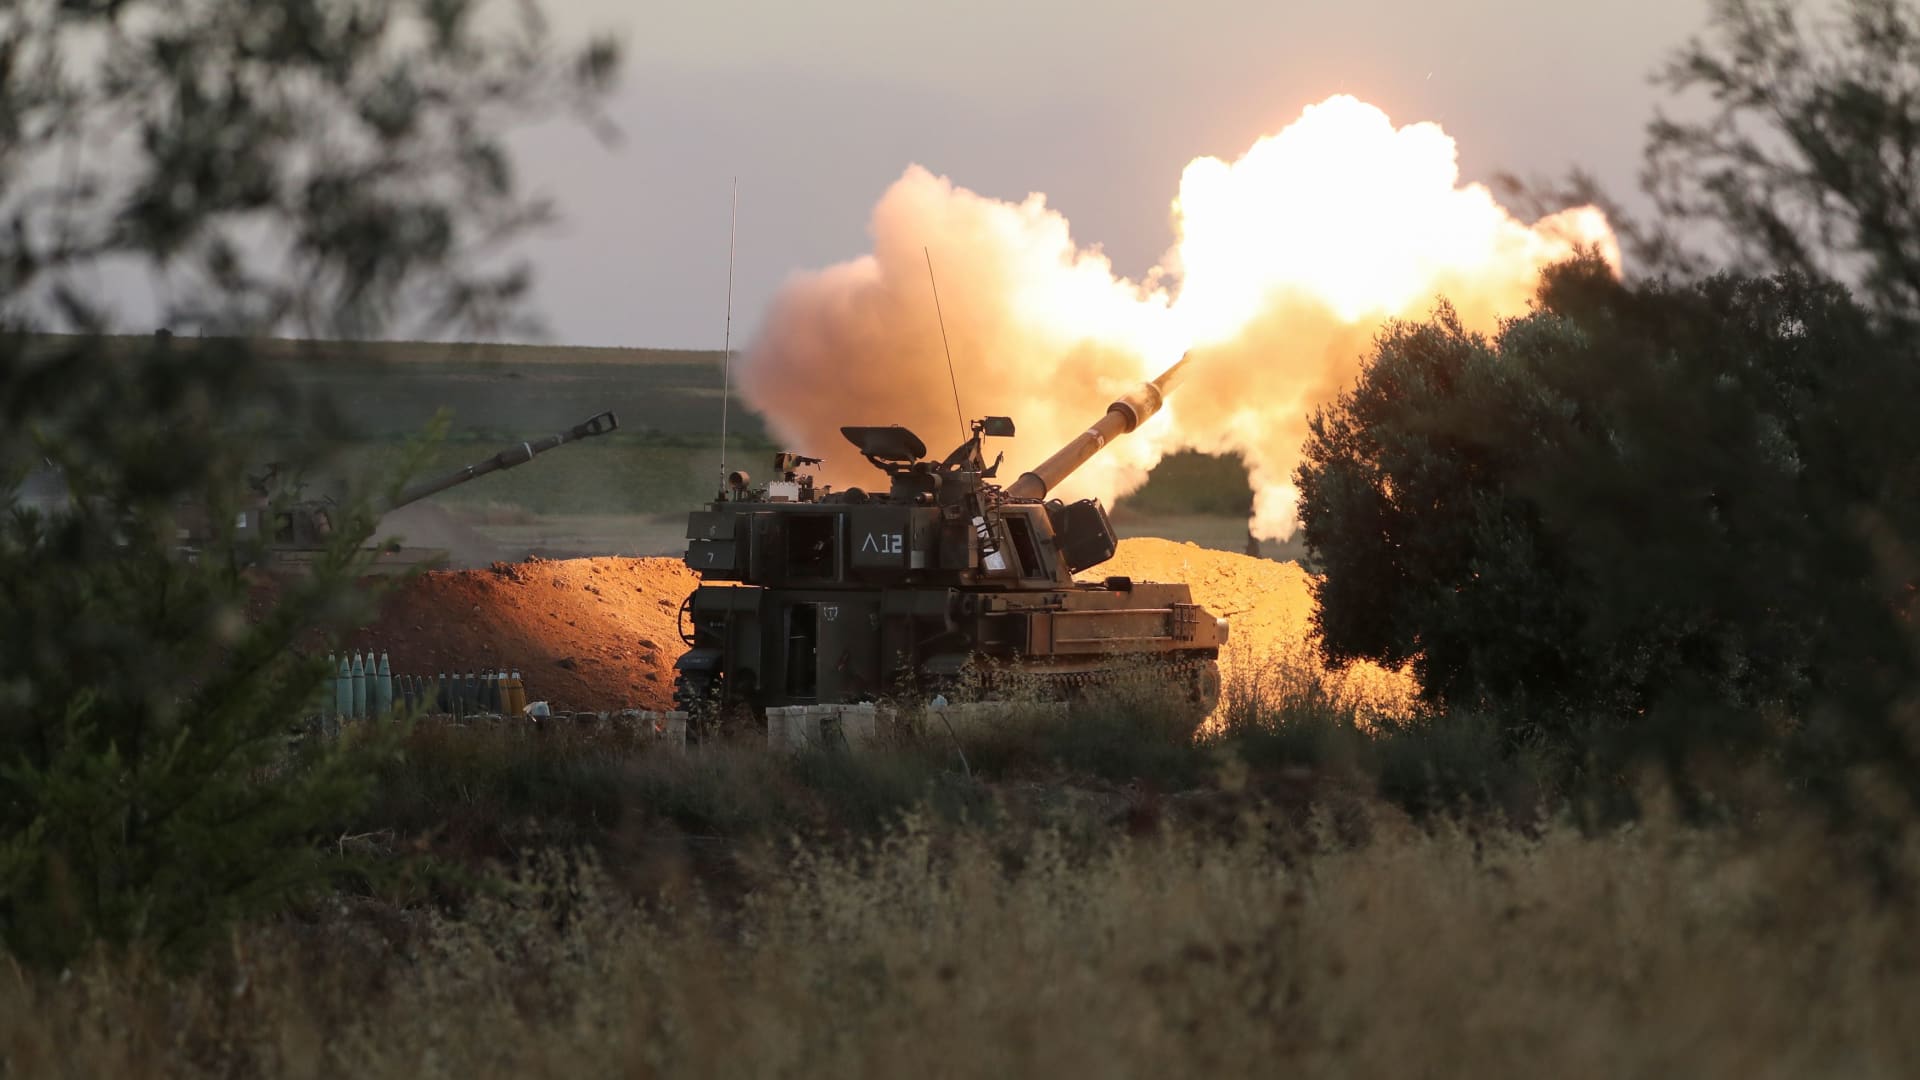 Israeli soldiers work in an artillery unit as it fires near the border between Israel and the Gaza strip, on the Israeli side May 19, 2021.